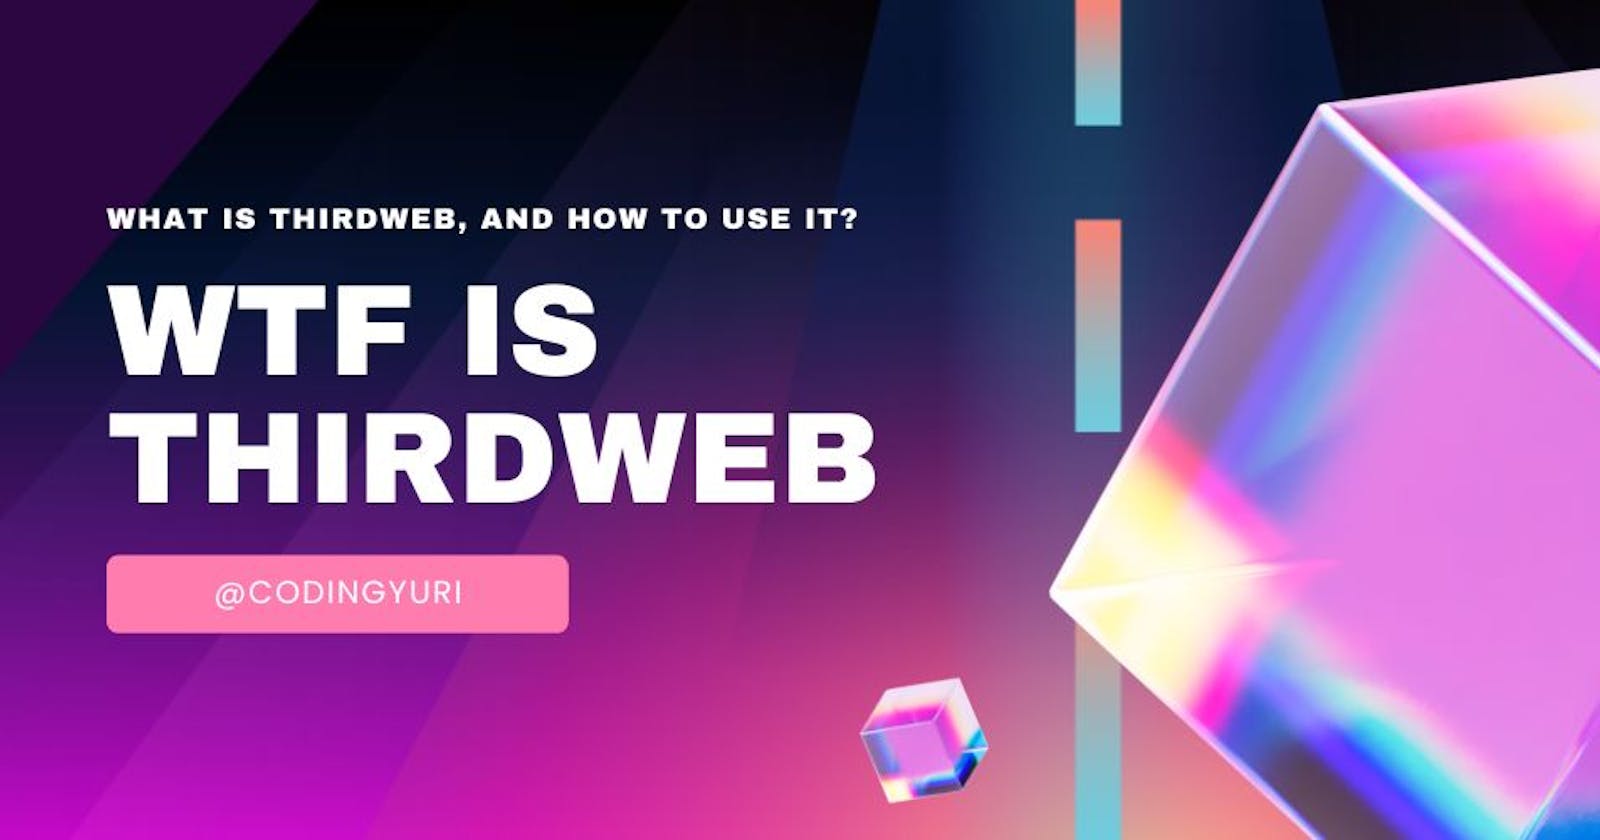 wtf is thirdweb & how to use it